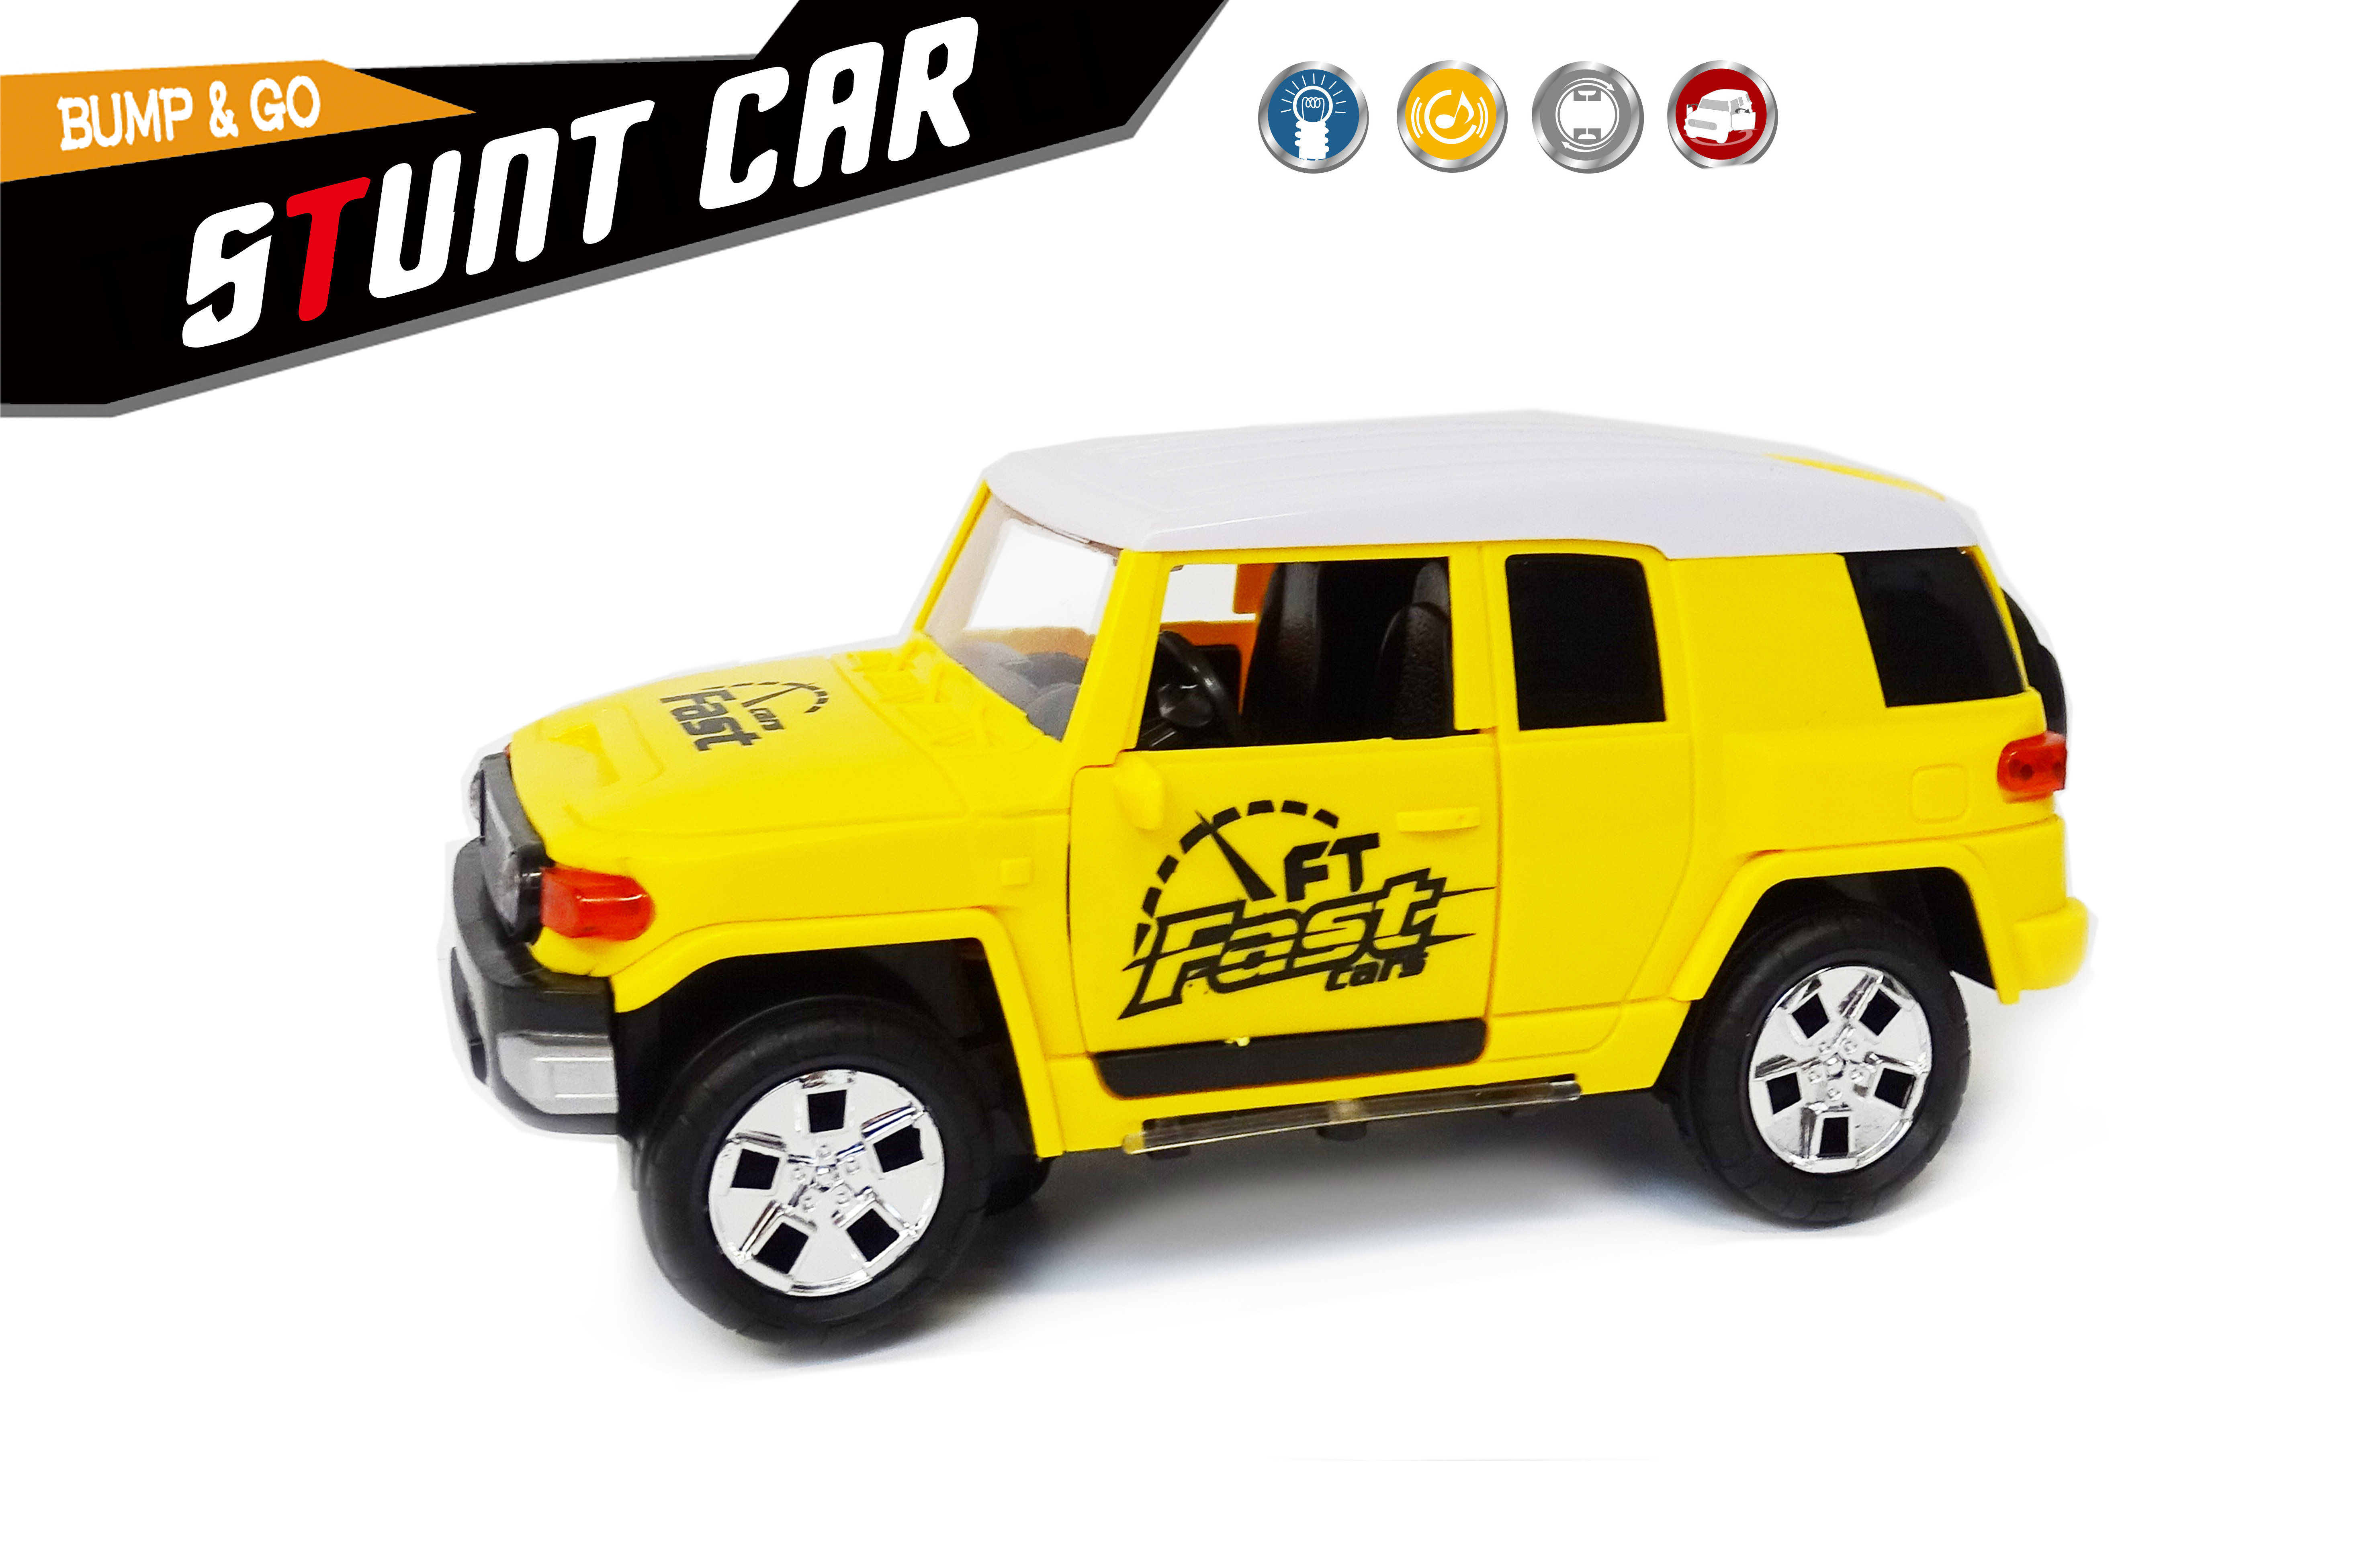 Stunt car toy - Super Max - Hummer with acrobatic movement -Led light and sound (20CM)